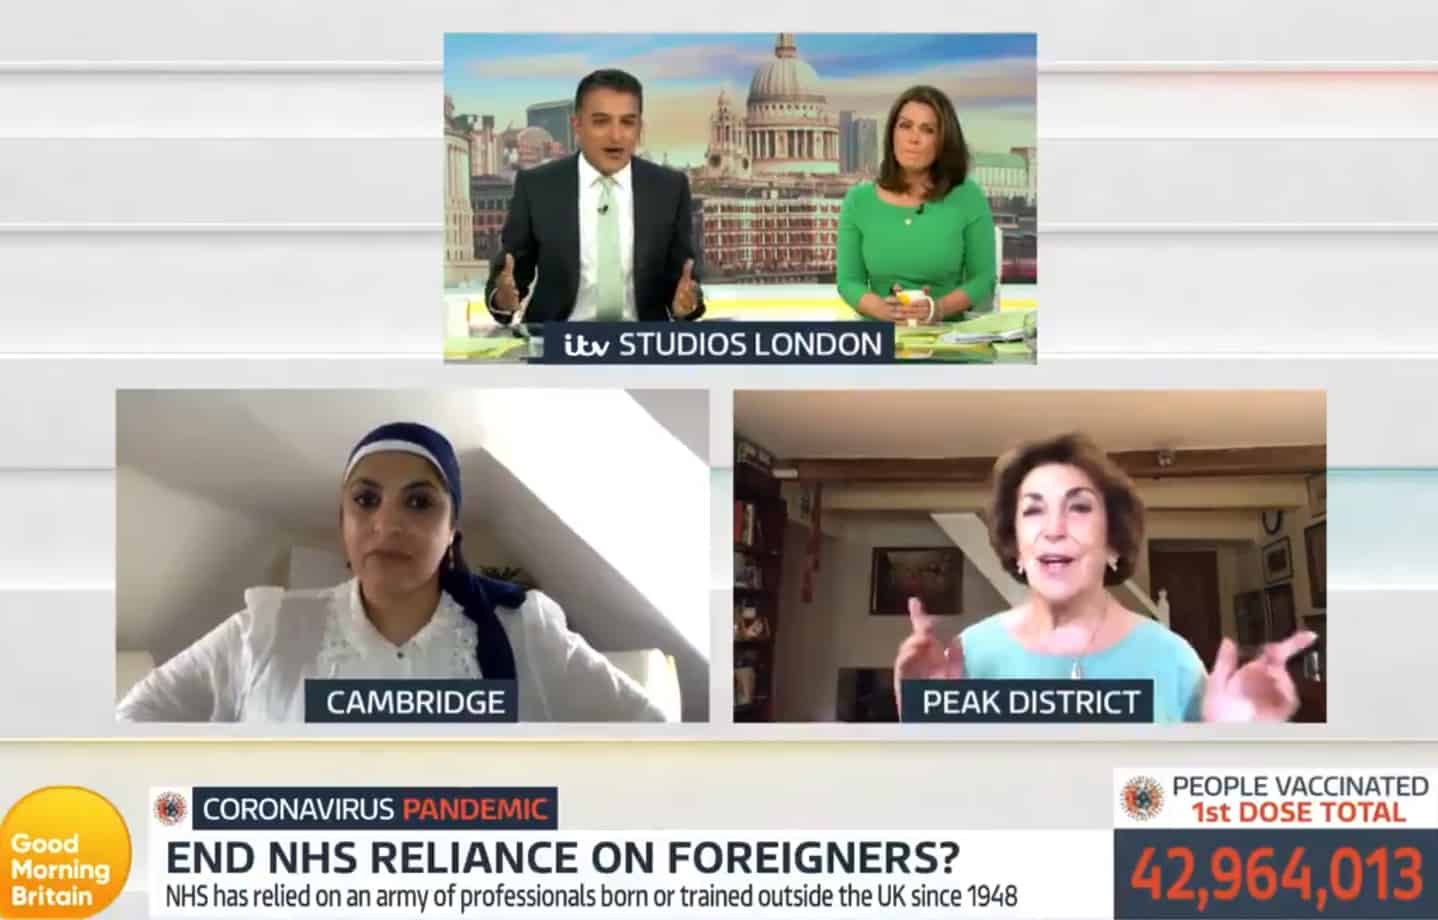 ‘You’re turning into Piers Morgan’: Adil Ray blasts Edwina Currie over NHS migrant worker comments